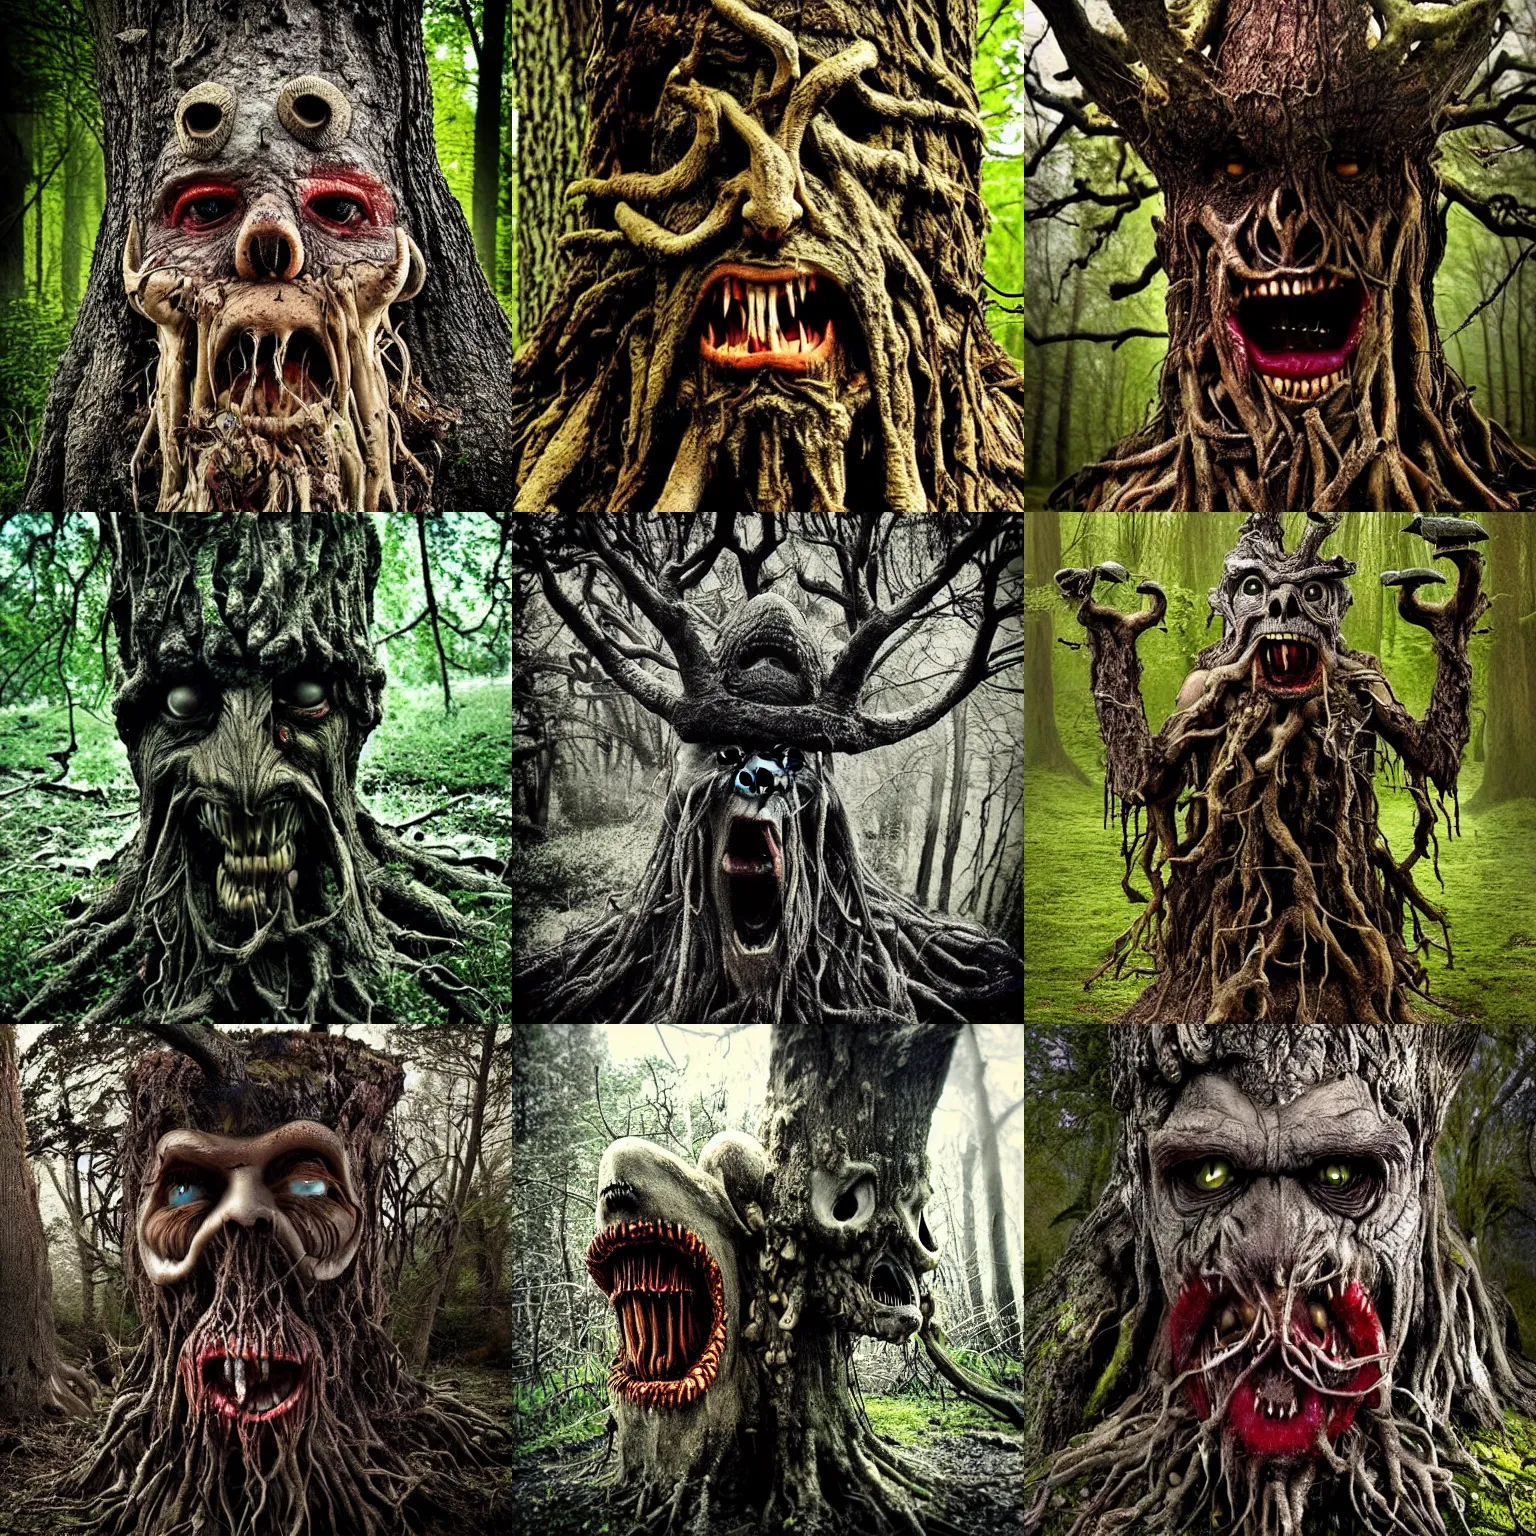 Prompt: creepy scary photograph of angry treebeard evil oak tree savagely eating amanita mushrooms!!! 🍄, dark fantasy horror, highly detailed, disturbing tortured face made of wood, gaping maw with fangs, oak tree ent, fog, eerie mist, bad quality